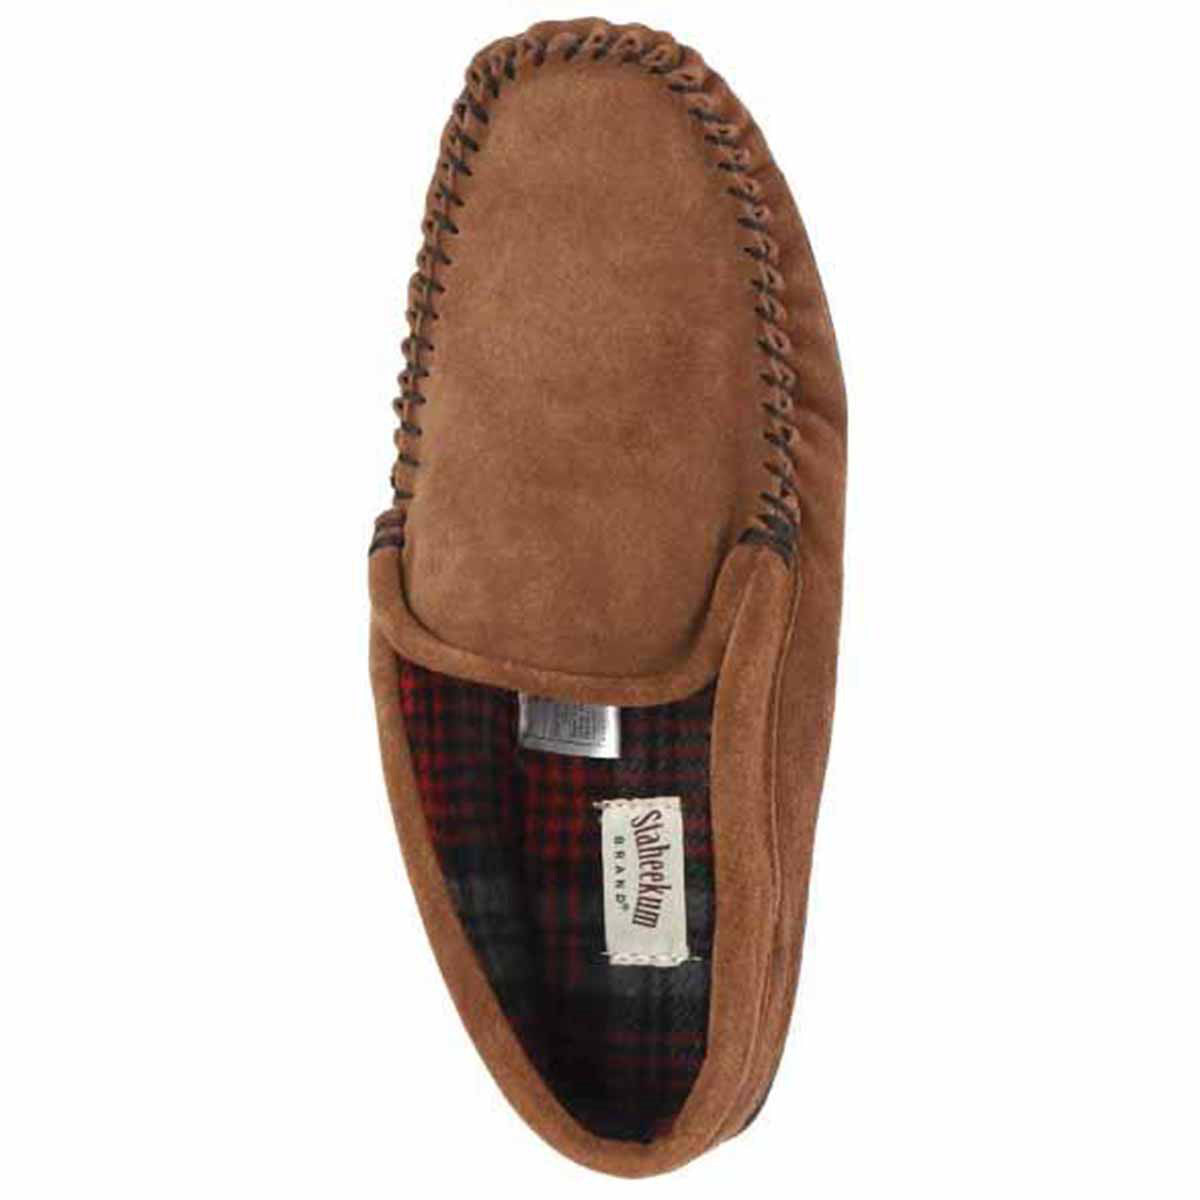 A single brown Staheekum Trapper Flannel slip-on moc with a plaid interior and cow suede upper.